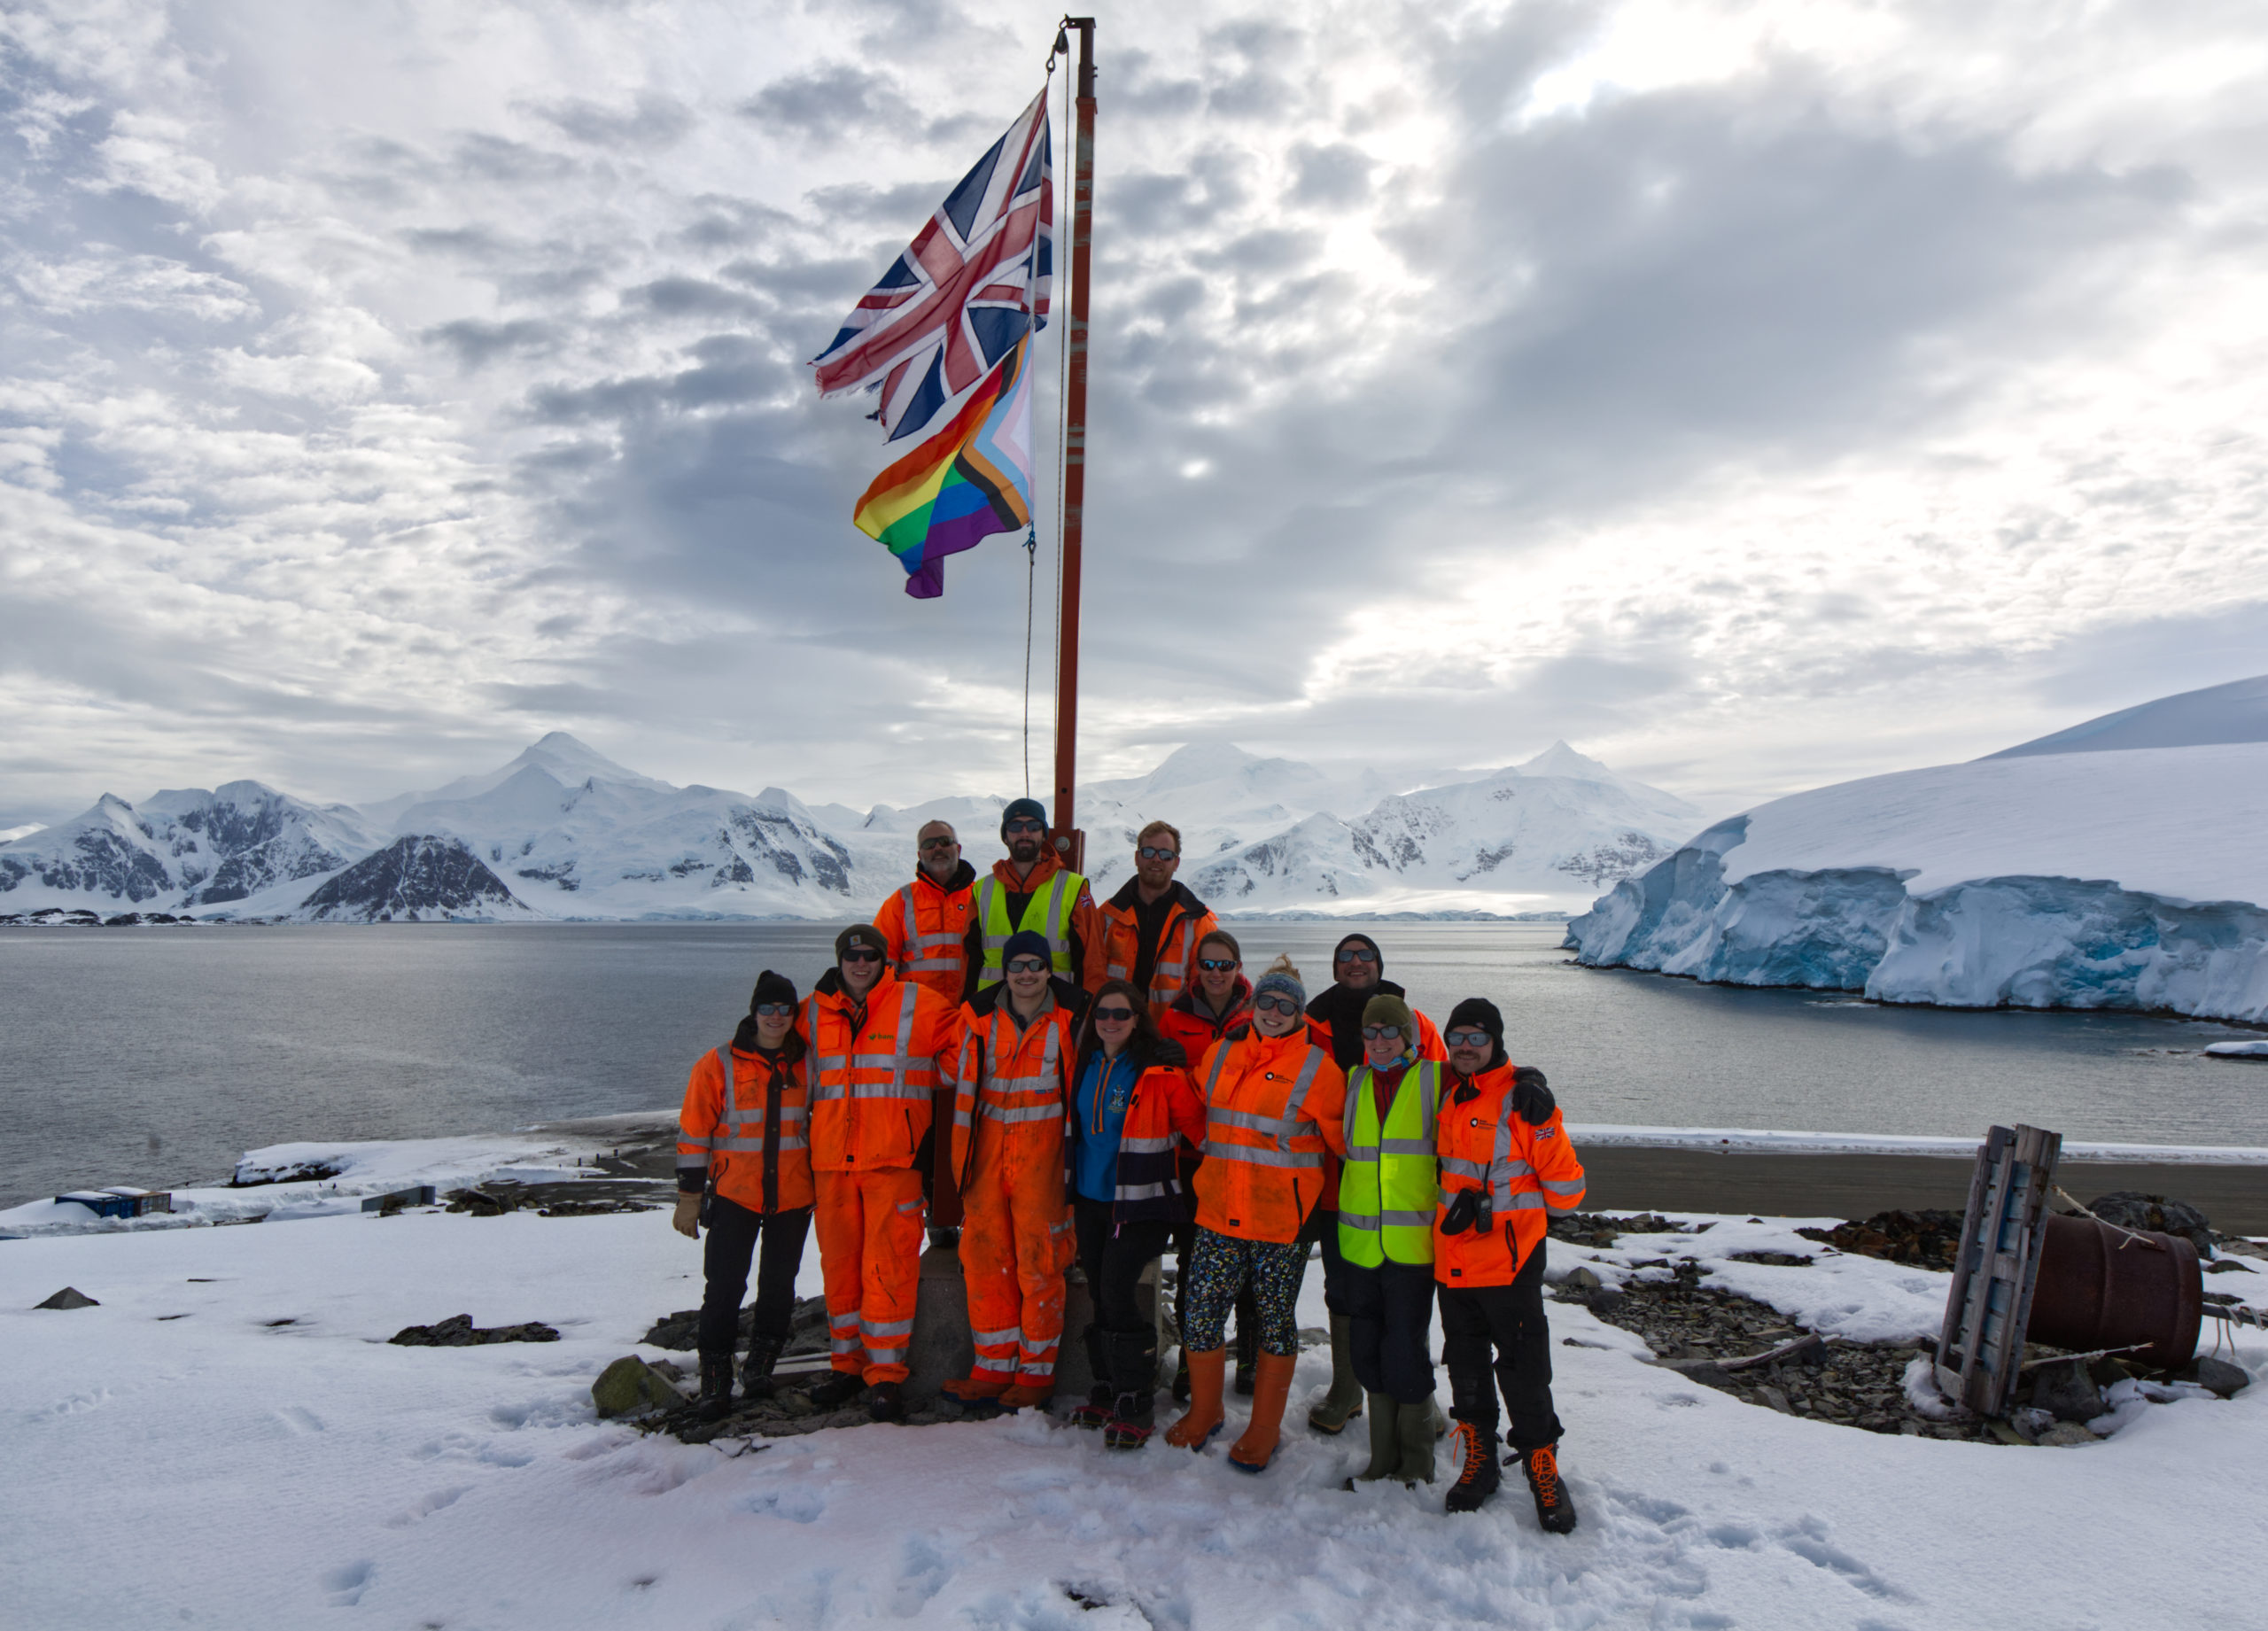 A group of 11 people wearing hi-vis coats stand on snow around a flag pole which has two flags flying from it - one is a union jack the other is a rainbow flag. In the background is a body of water and snowy mountains. 